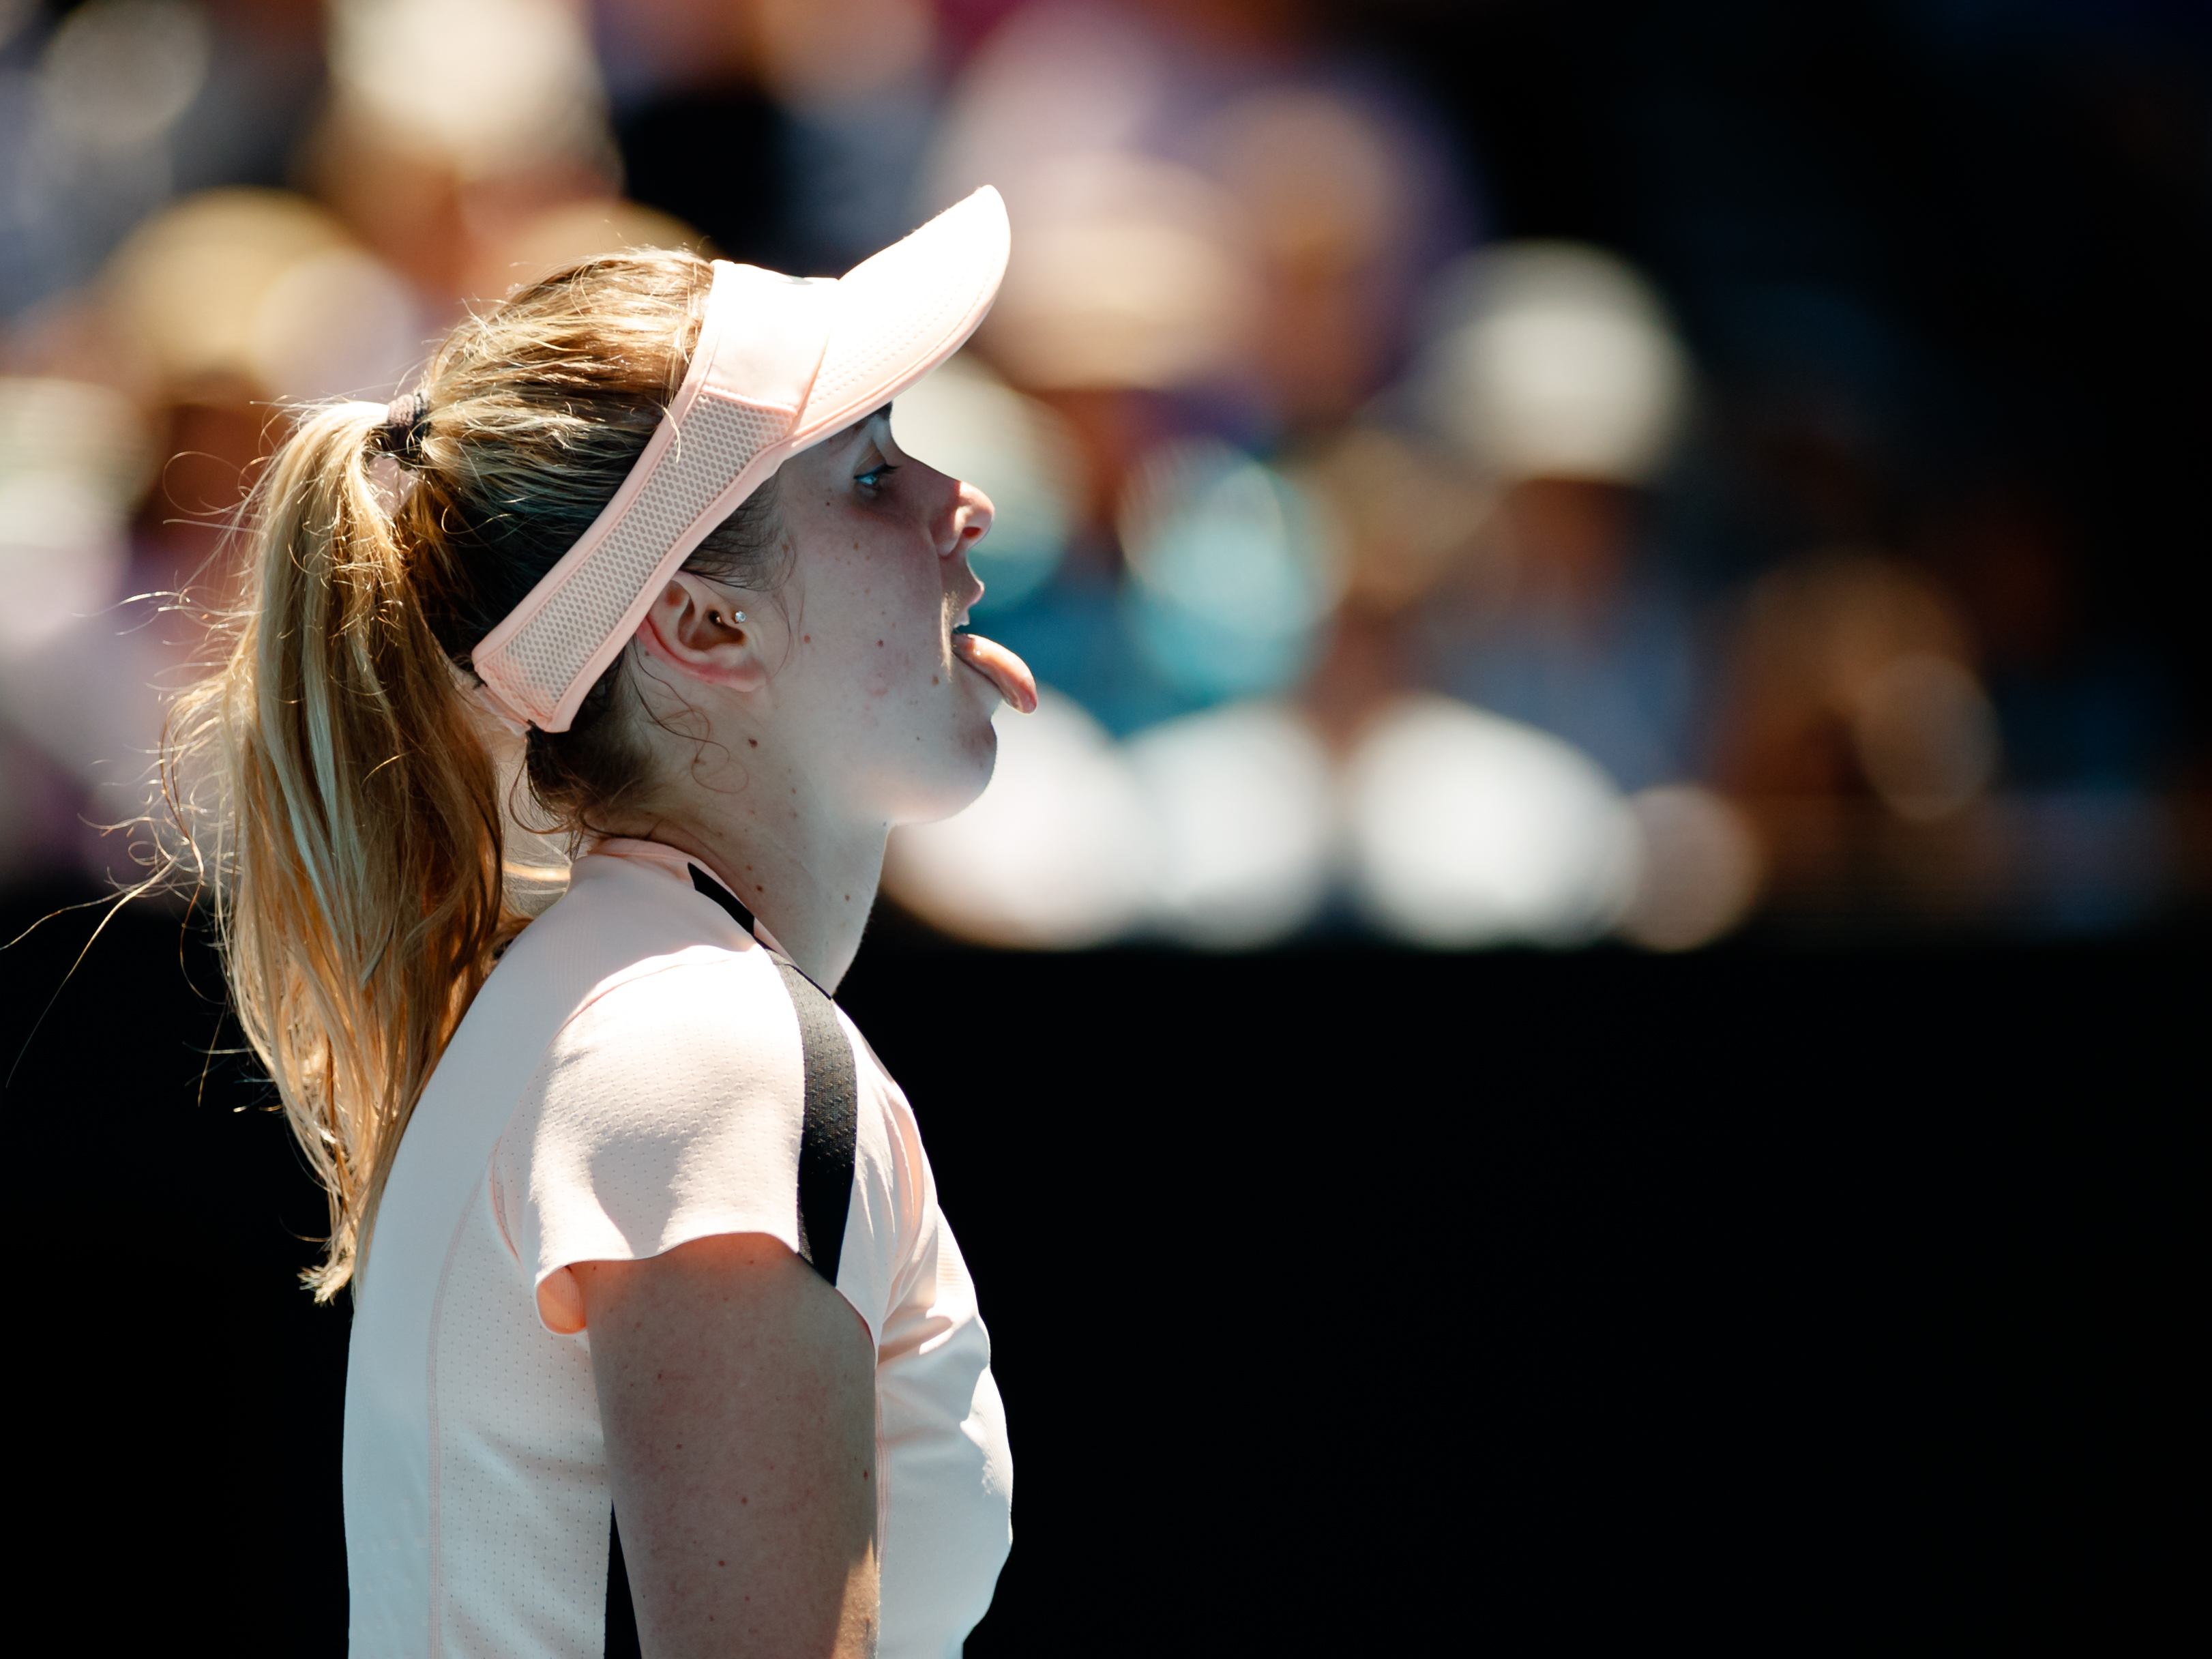 Svitolina Couldn’t Overcome Mertens or Hip Injury in Melbourne